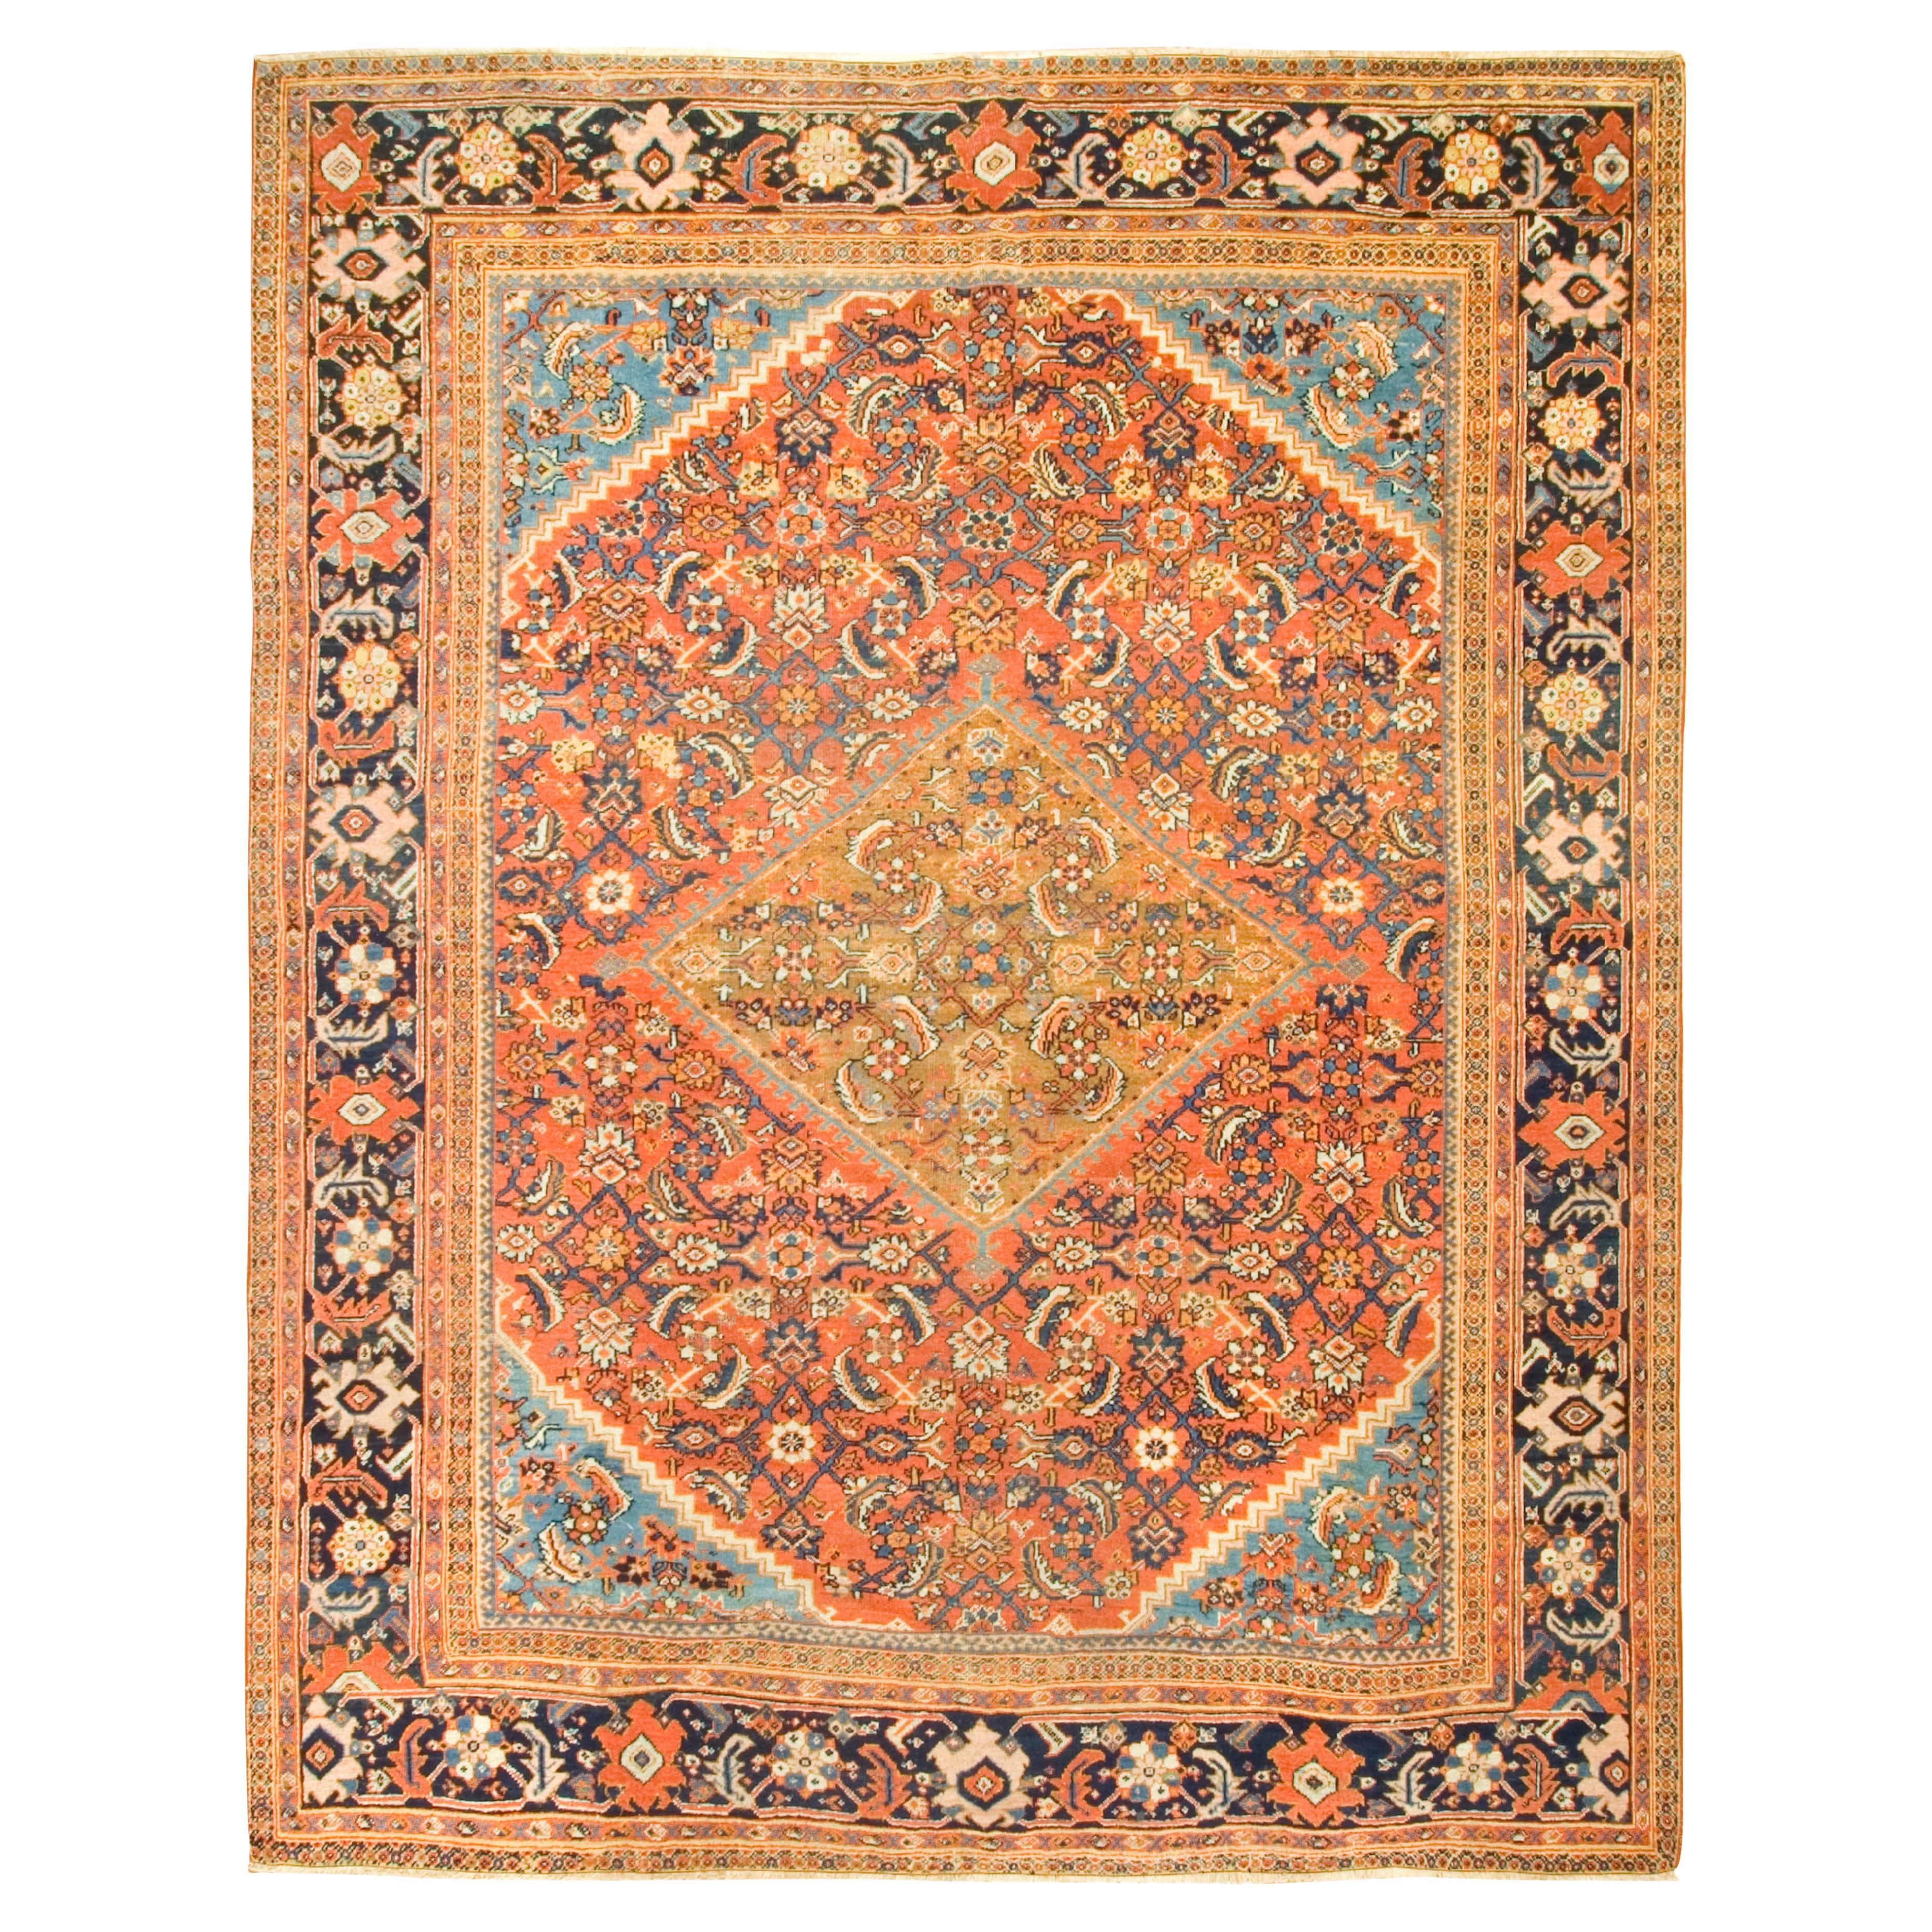 Antique Persian Sultanabad Rug Carpet, circa 1900 9' x 11' For Sale